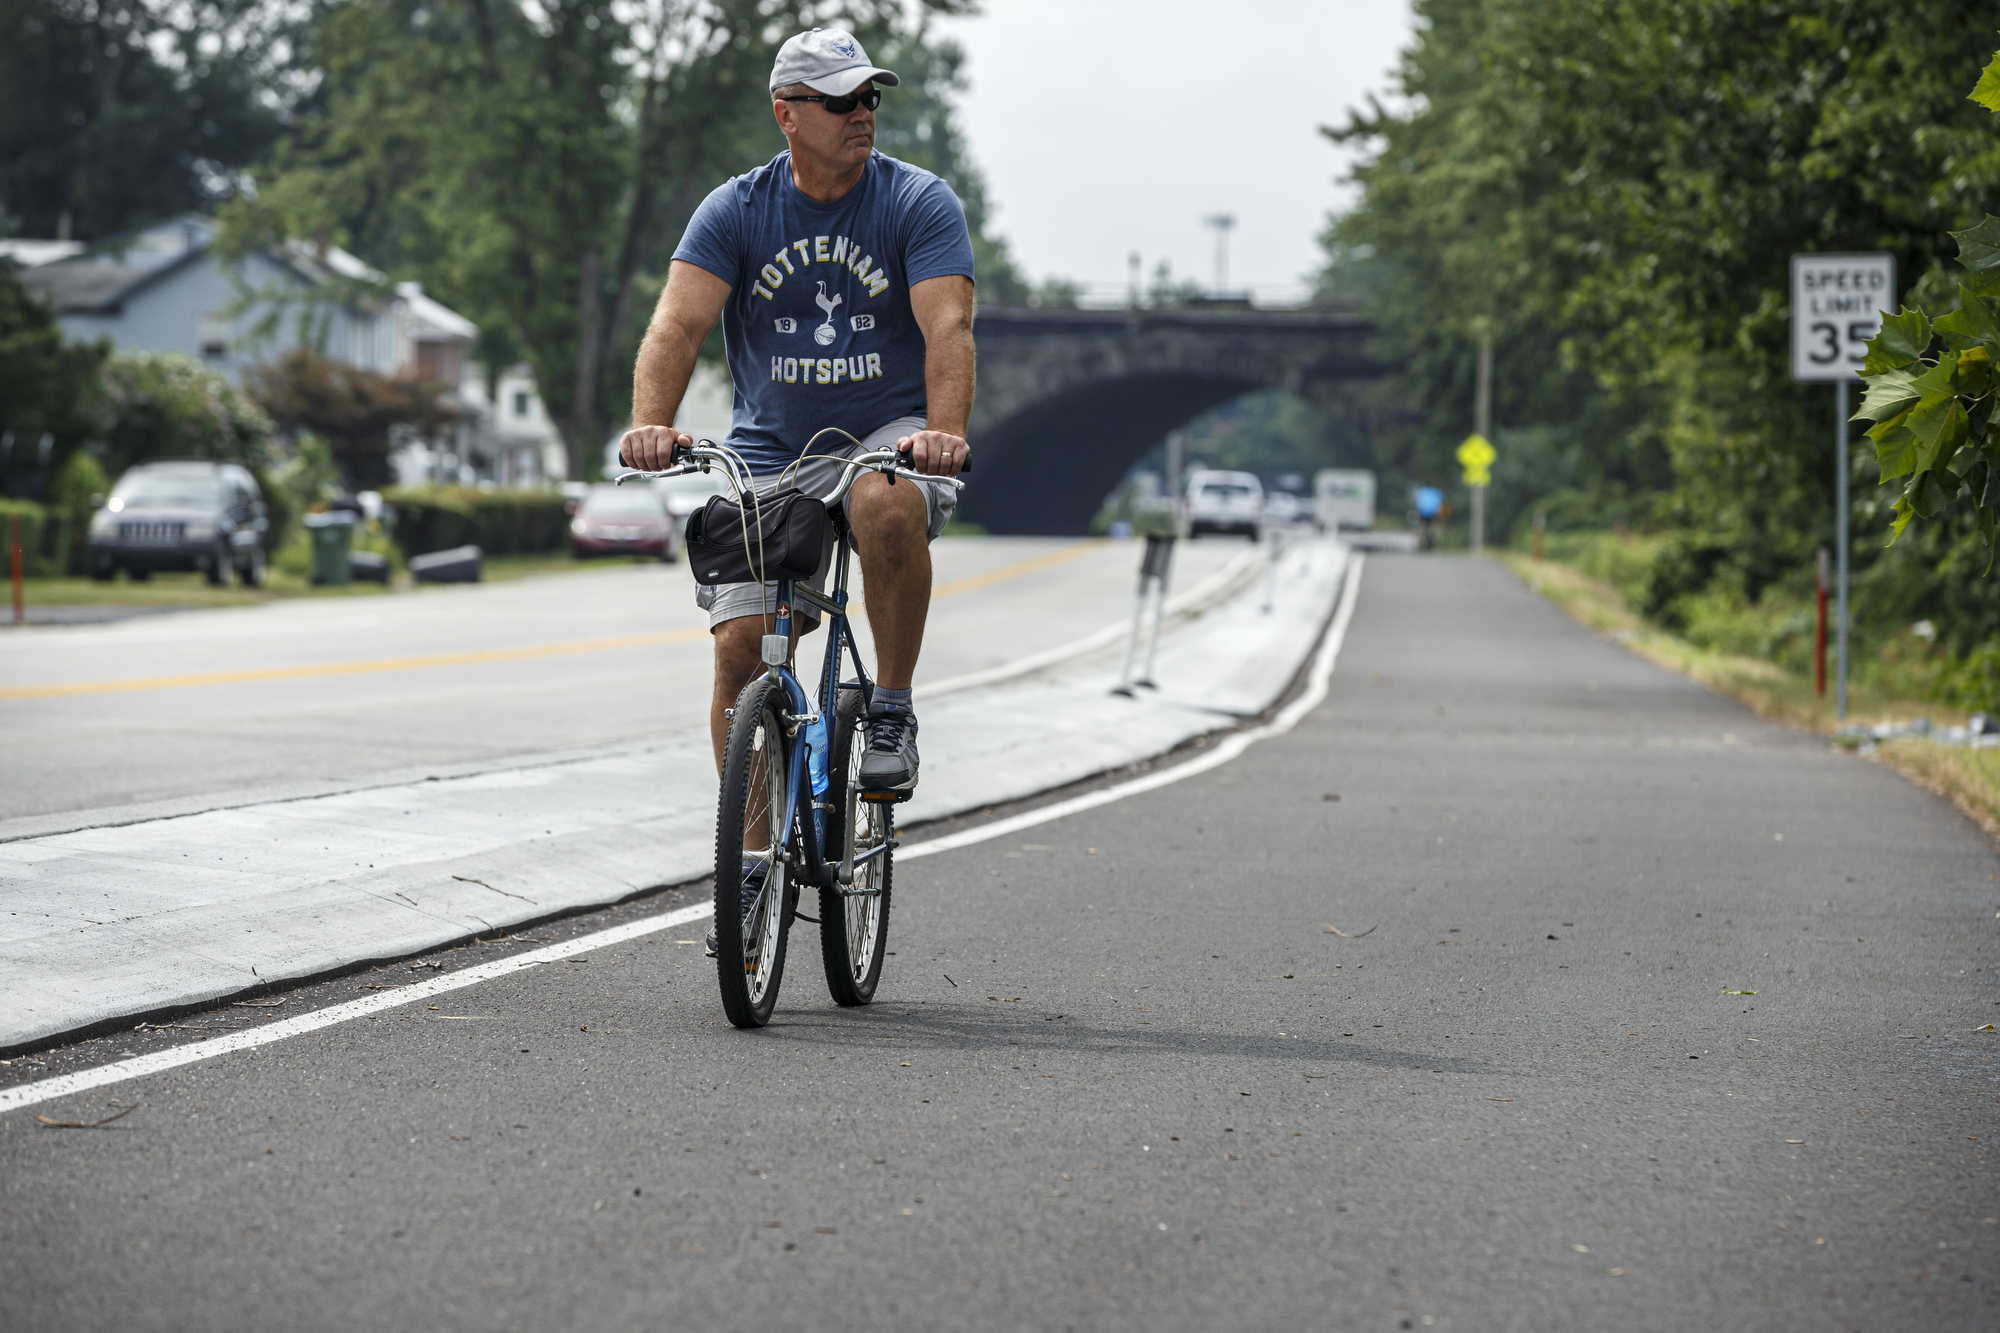 A bicyclist rides the Greenbelt trail extension along North Front Street near Fort Hunter Park. The Capital Area Greenbelt Fort Hunter 2-mile connector has been finished. The extension connects the 20-mile Greenbelt between Fort Hunter Park and the northernmost part of the Greenbelt at Lingletstown Road at Wildwood Park.July 17, 2020. Dan Gleiter | dgleiter@pennlive.com